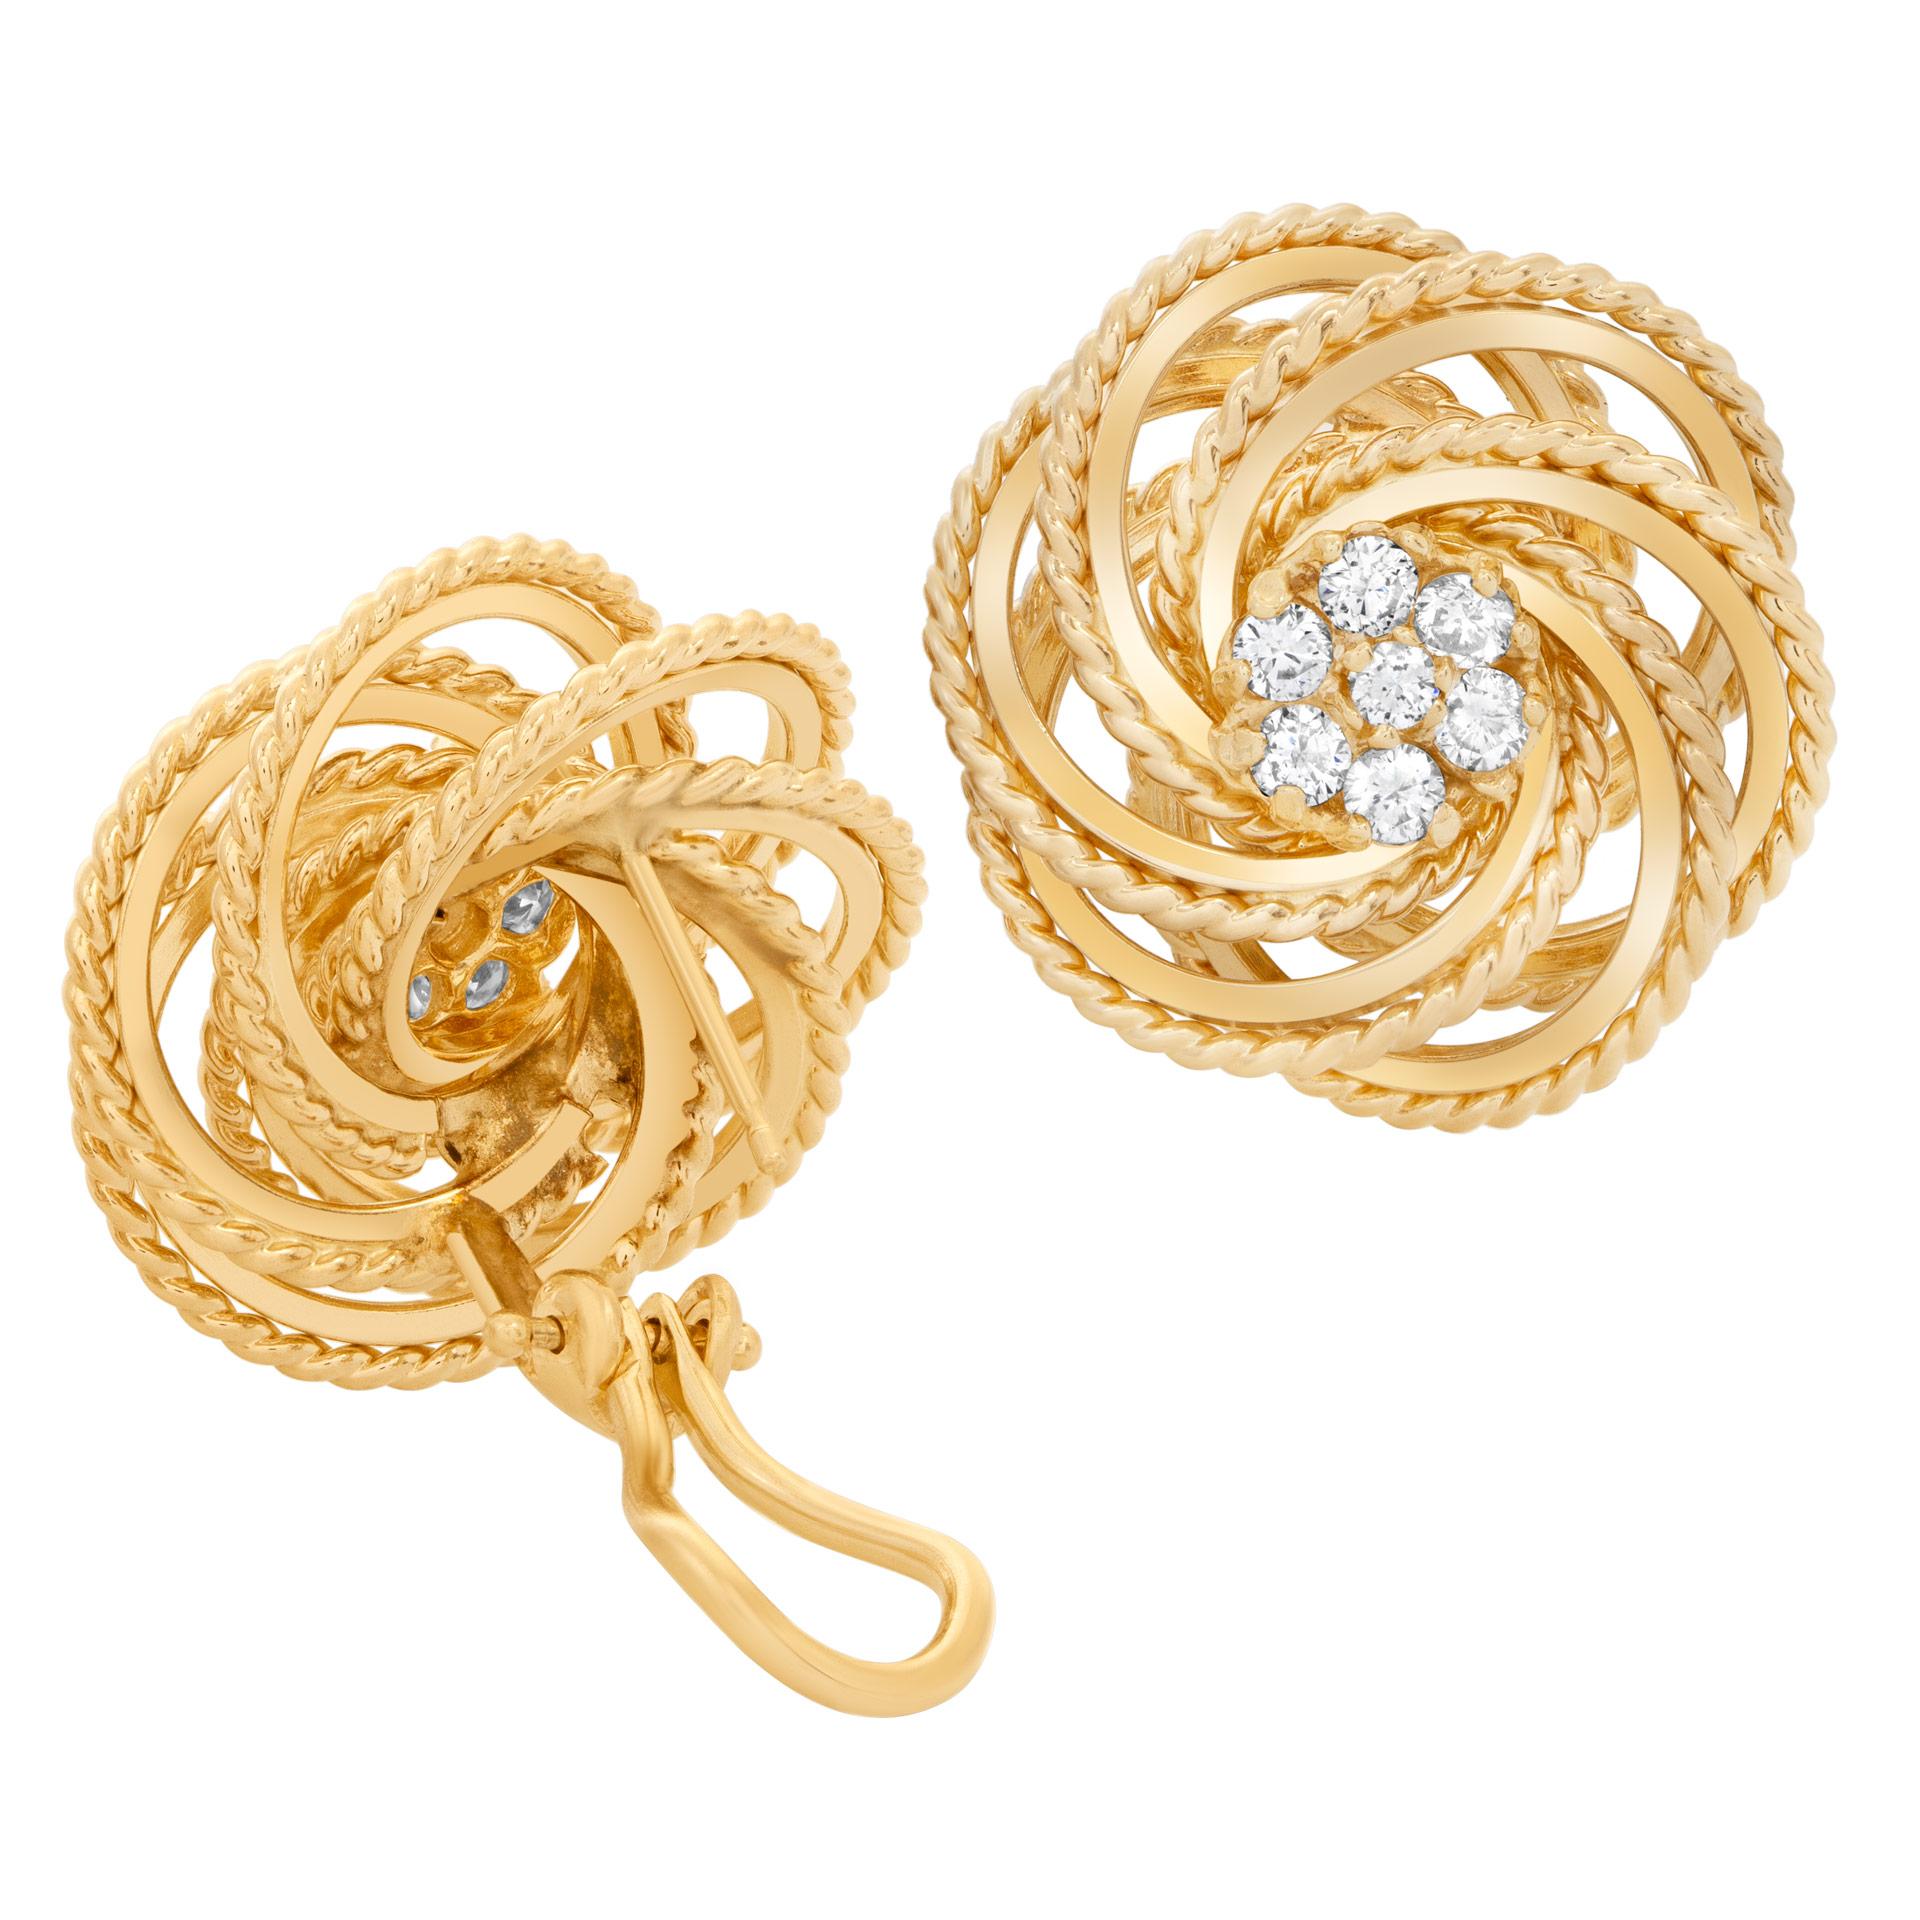 Round Cut Diamond Knotted Earrings in 14k Yellow Gold